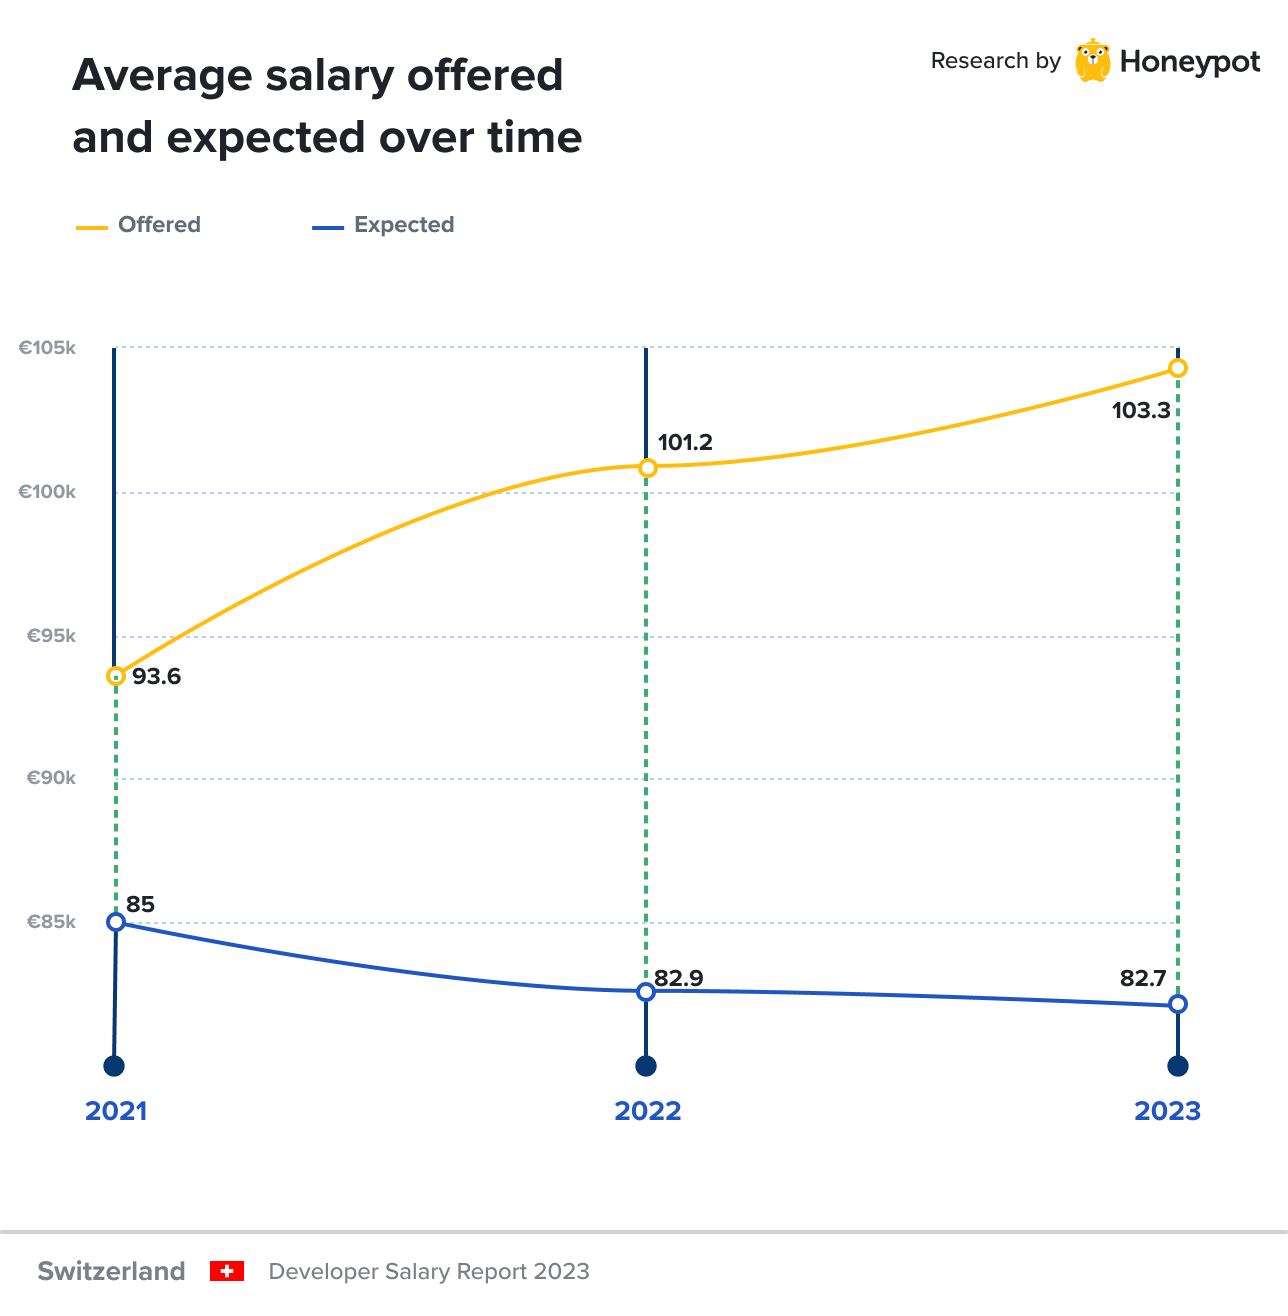 Switzerland – Average salary offered vs. expected over time